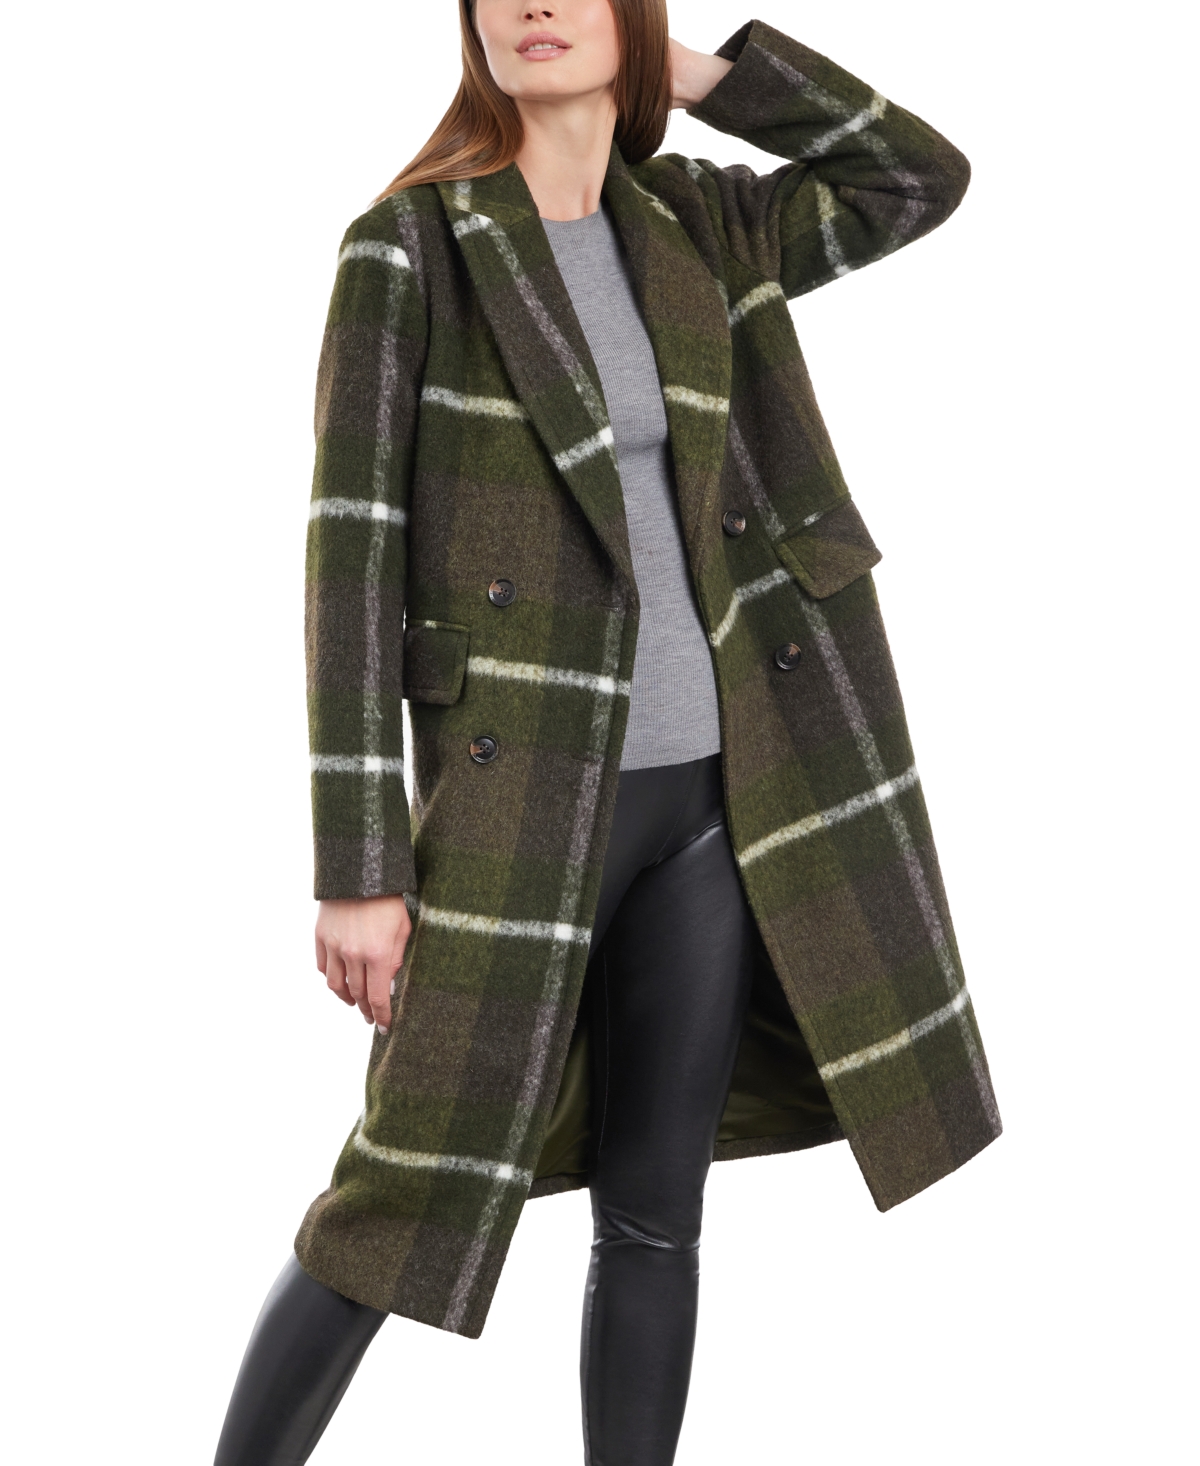 Women's Double-Breasted Notch-Collar Plaid Coat - Green Brown Plaid